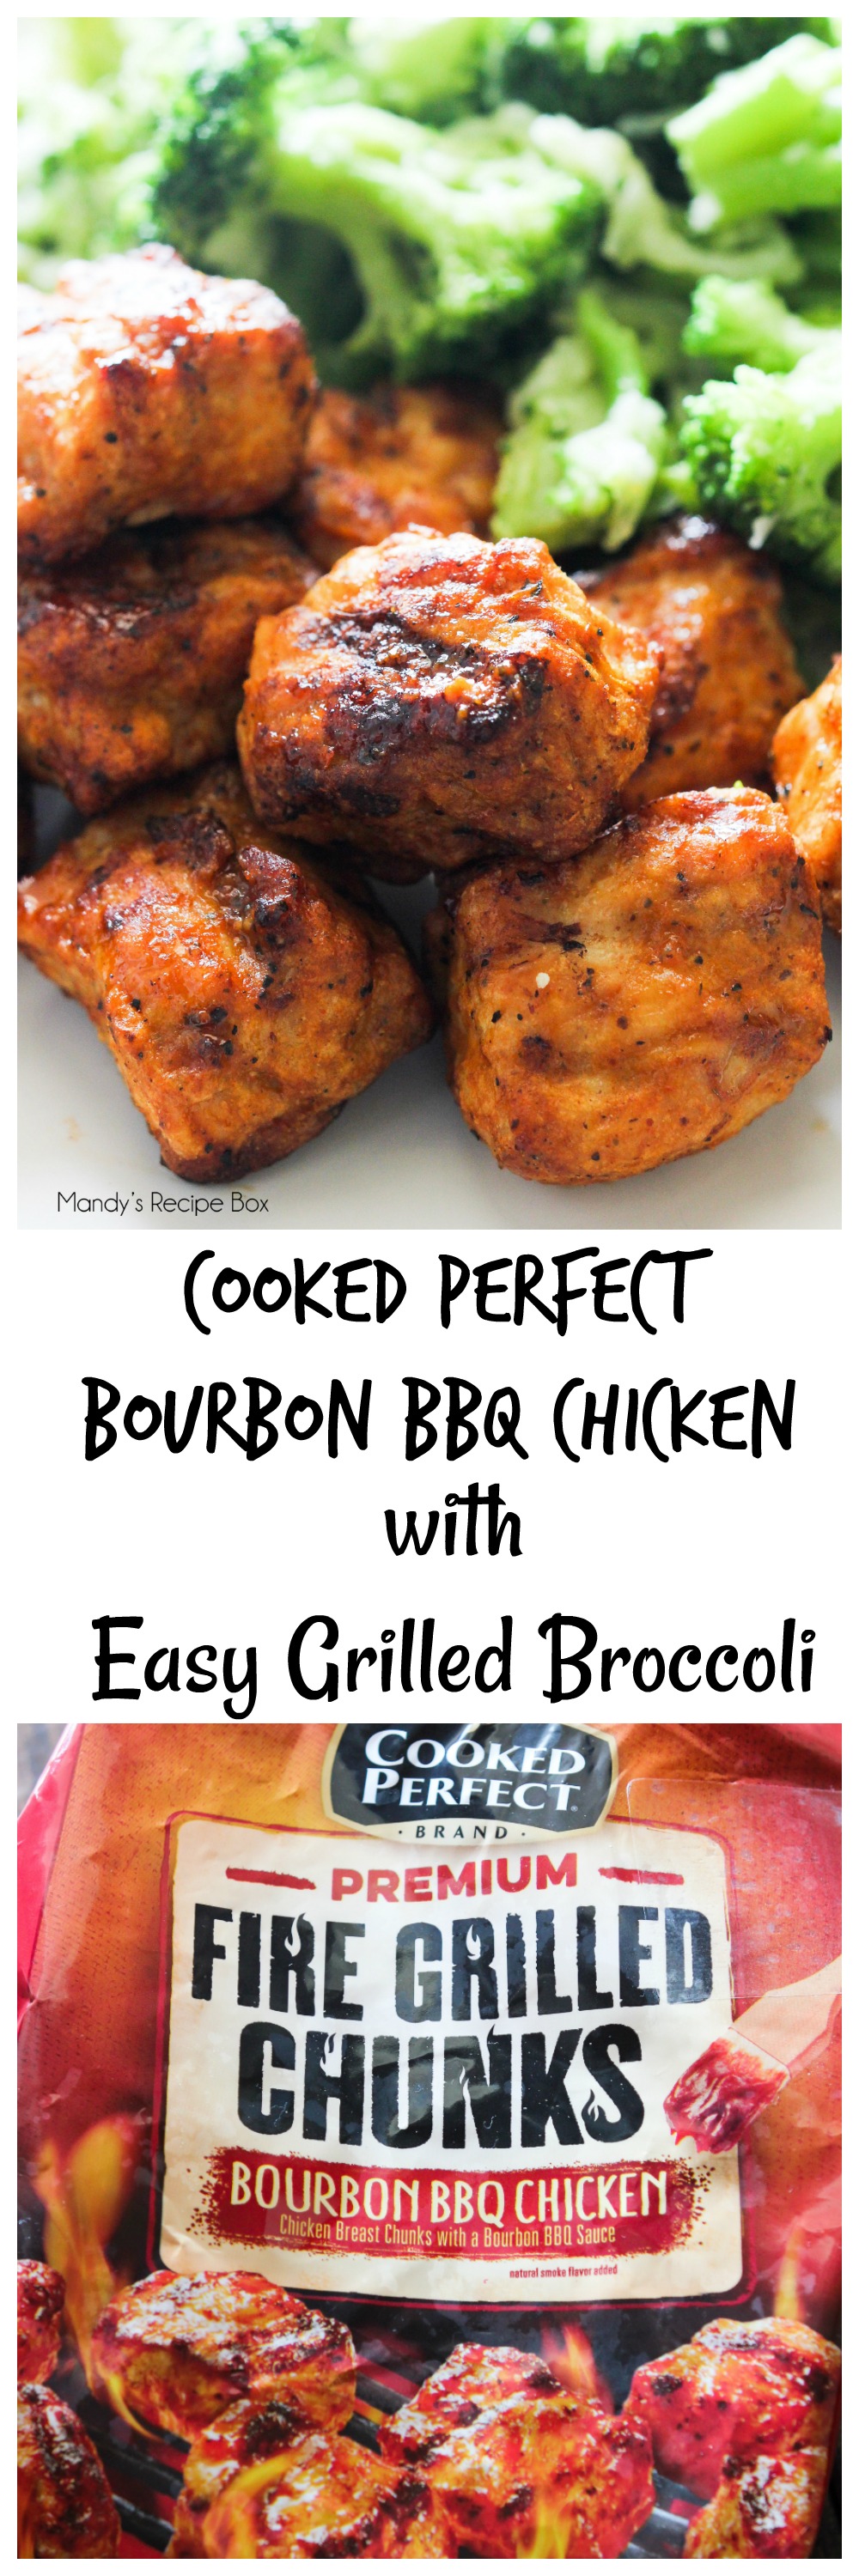 Cooked Perfect Bourbon BBQ Chicken with Easy Grilled Broccoli 